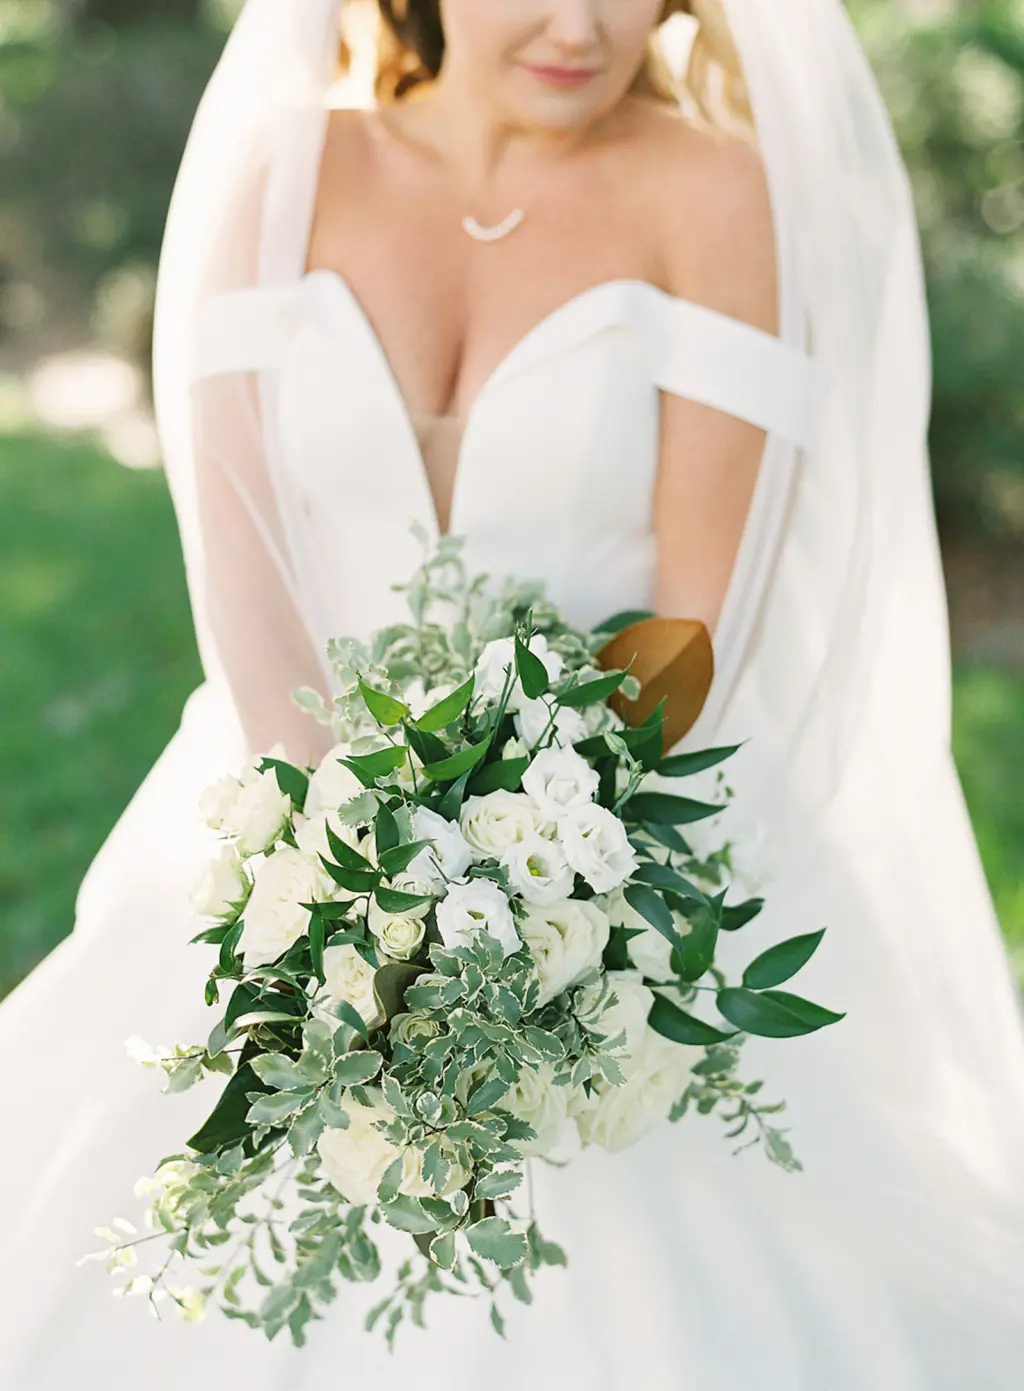 Cascading White Rose and Greenery Bridal Bouquet for Wedding Ceremony | Tampa Bay Florist Save the Date Florida